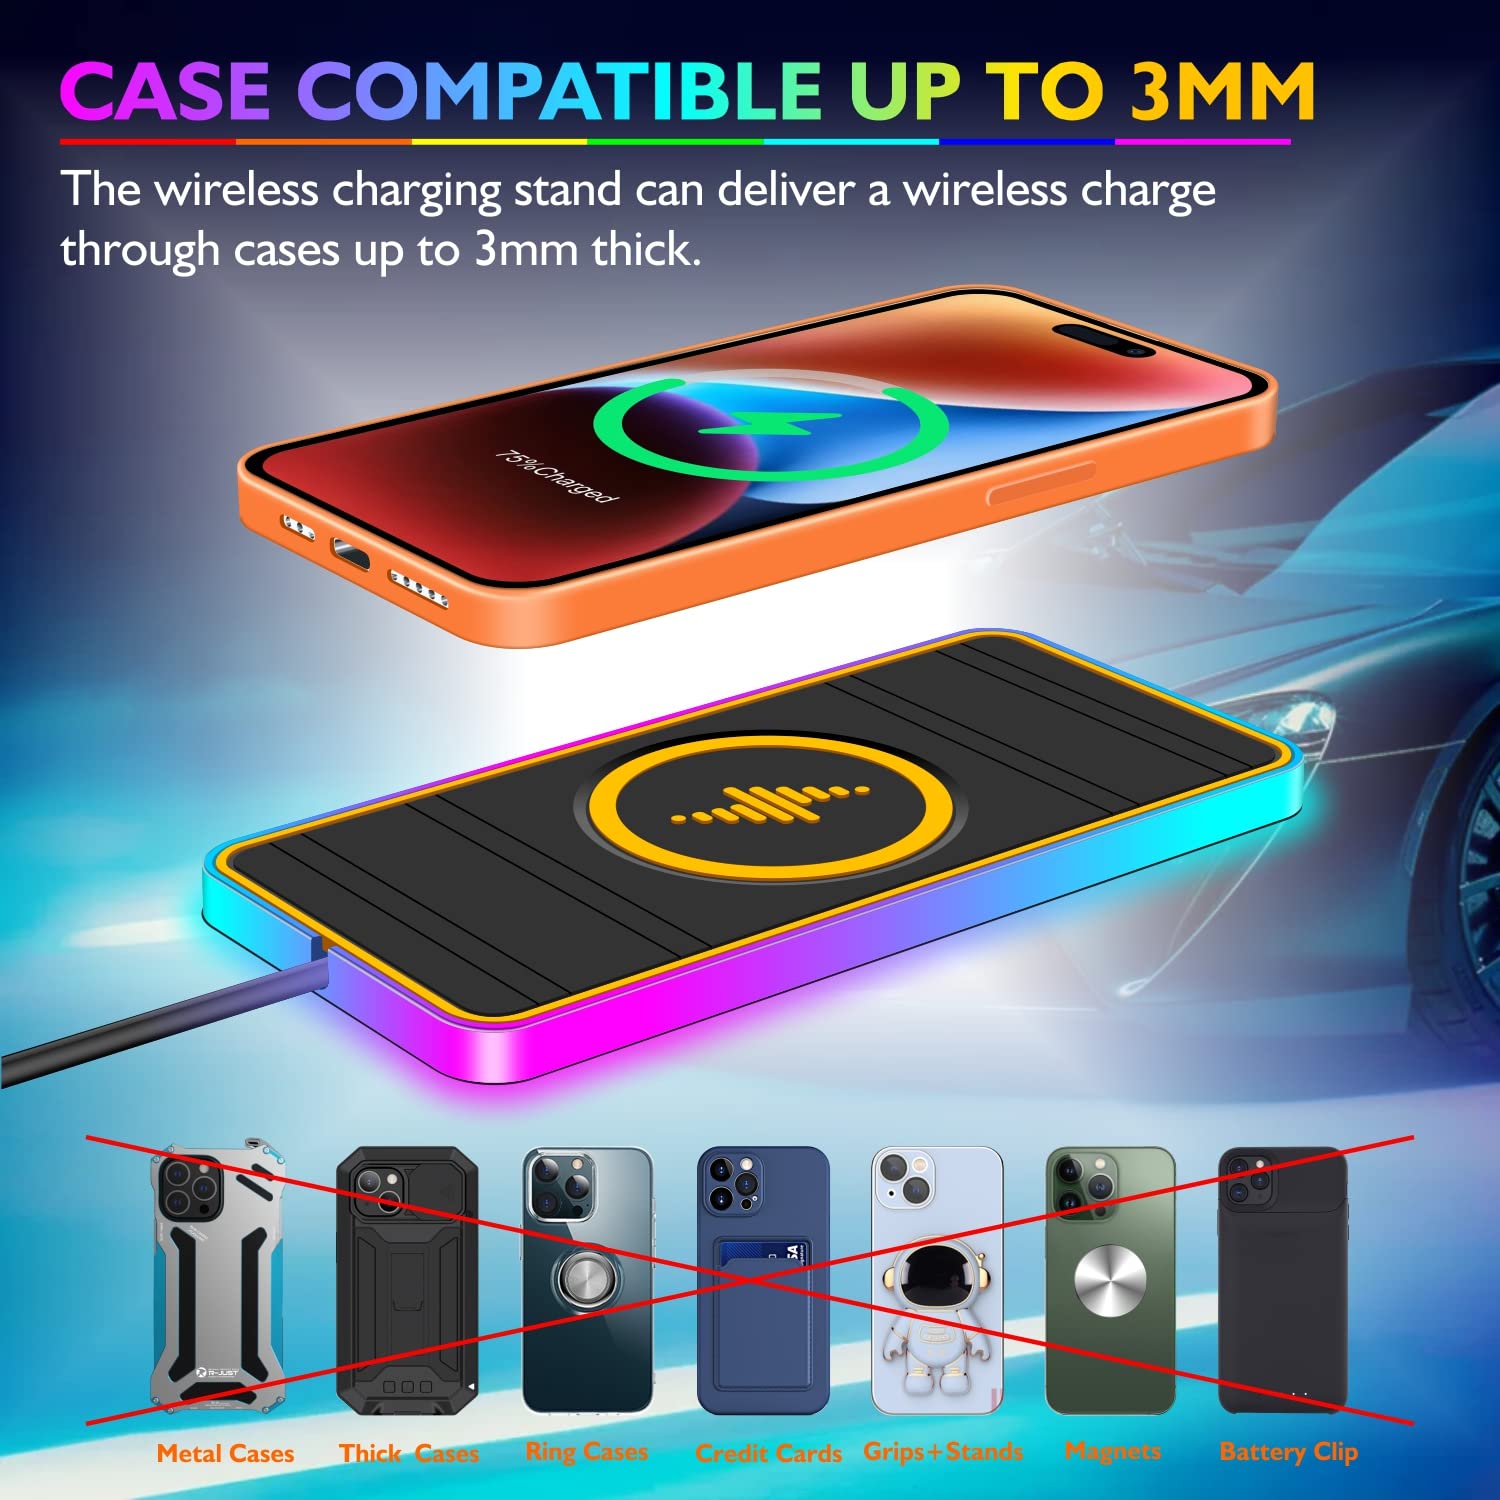 Wireless Car Charger, LANSEMKU Wireless Car Charging Pad Non Slip Car Wireless Phone Charging mat fit for iPhone 14 13 12 11 Pro Max Xs, Samsung Galaxy S23 Ultra S22 S21 S20, S10+ S9+ Note 9, etc